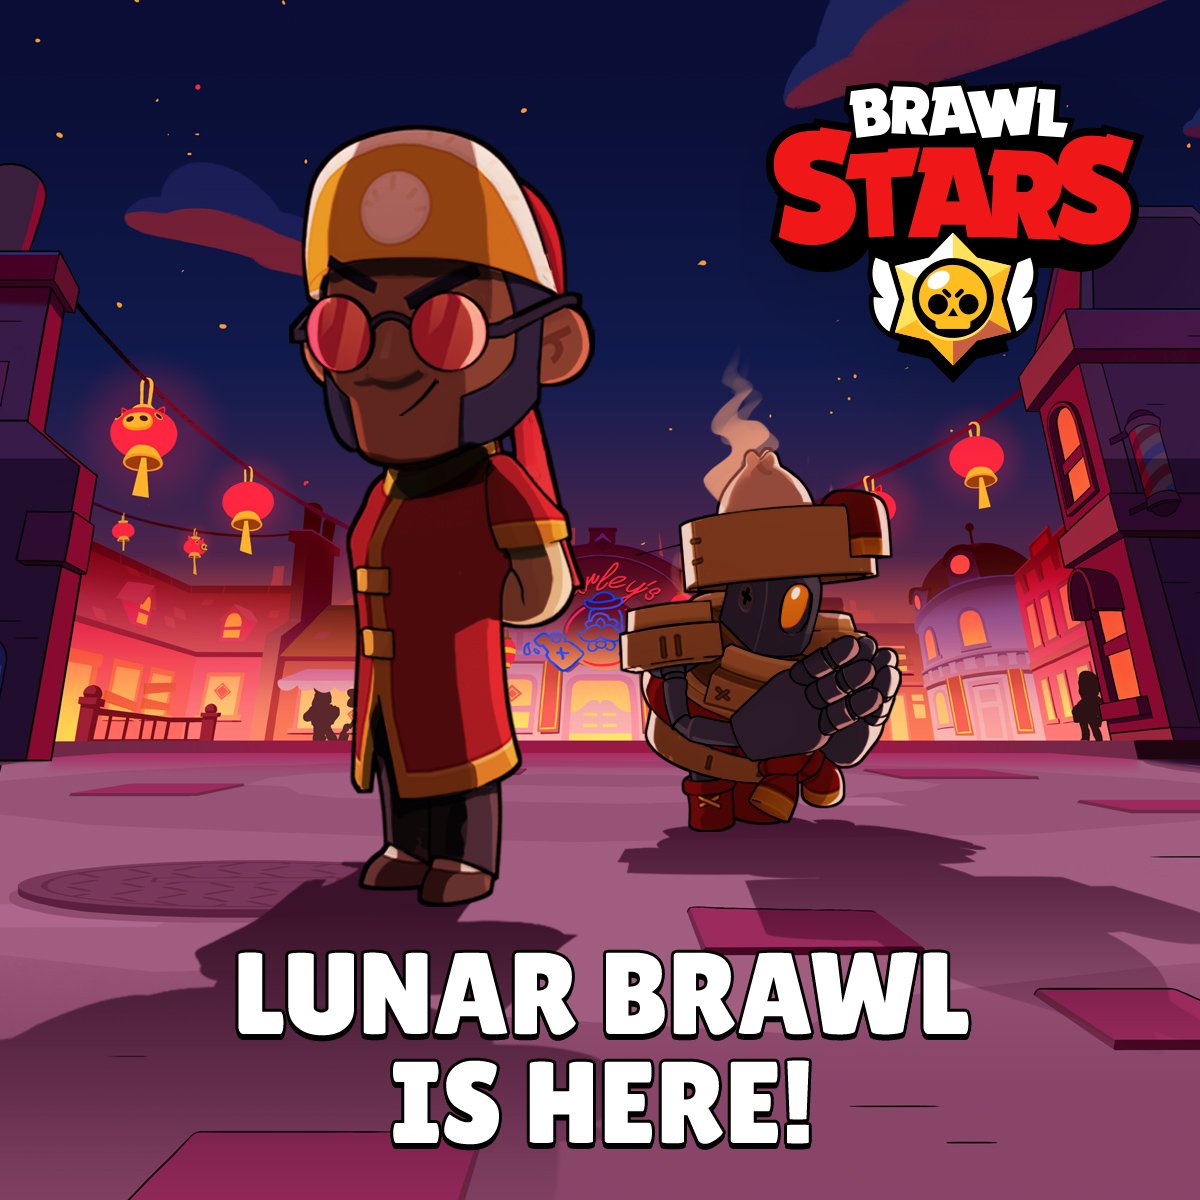 Brawl Stars On Twitter The Lunar Brawl Event Is Here Grab Your Dumpling Darryl Lion Dance Brock And Royal Agent Colt Skin Now Before They Re Gone Https T Co Vd10radw5k - darryl dibujos brawl stars